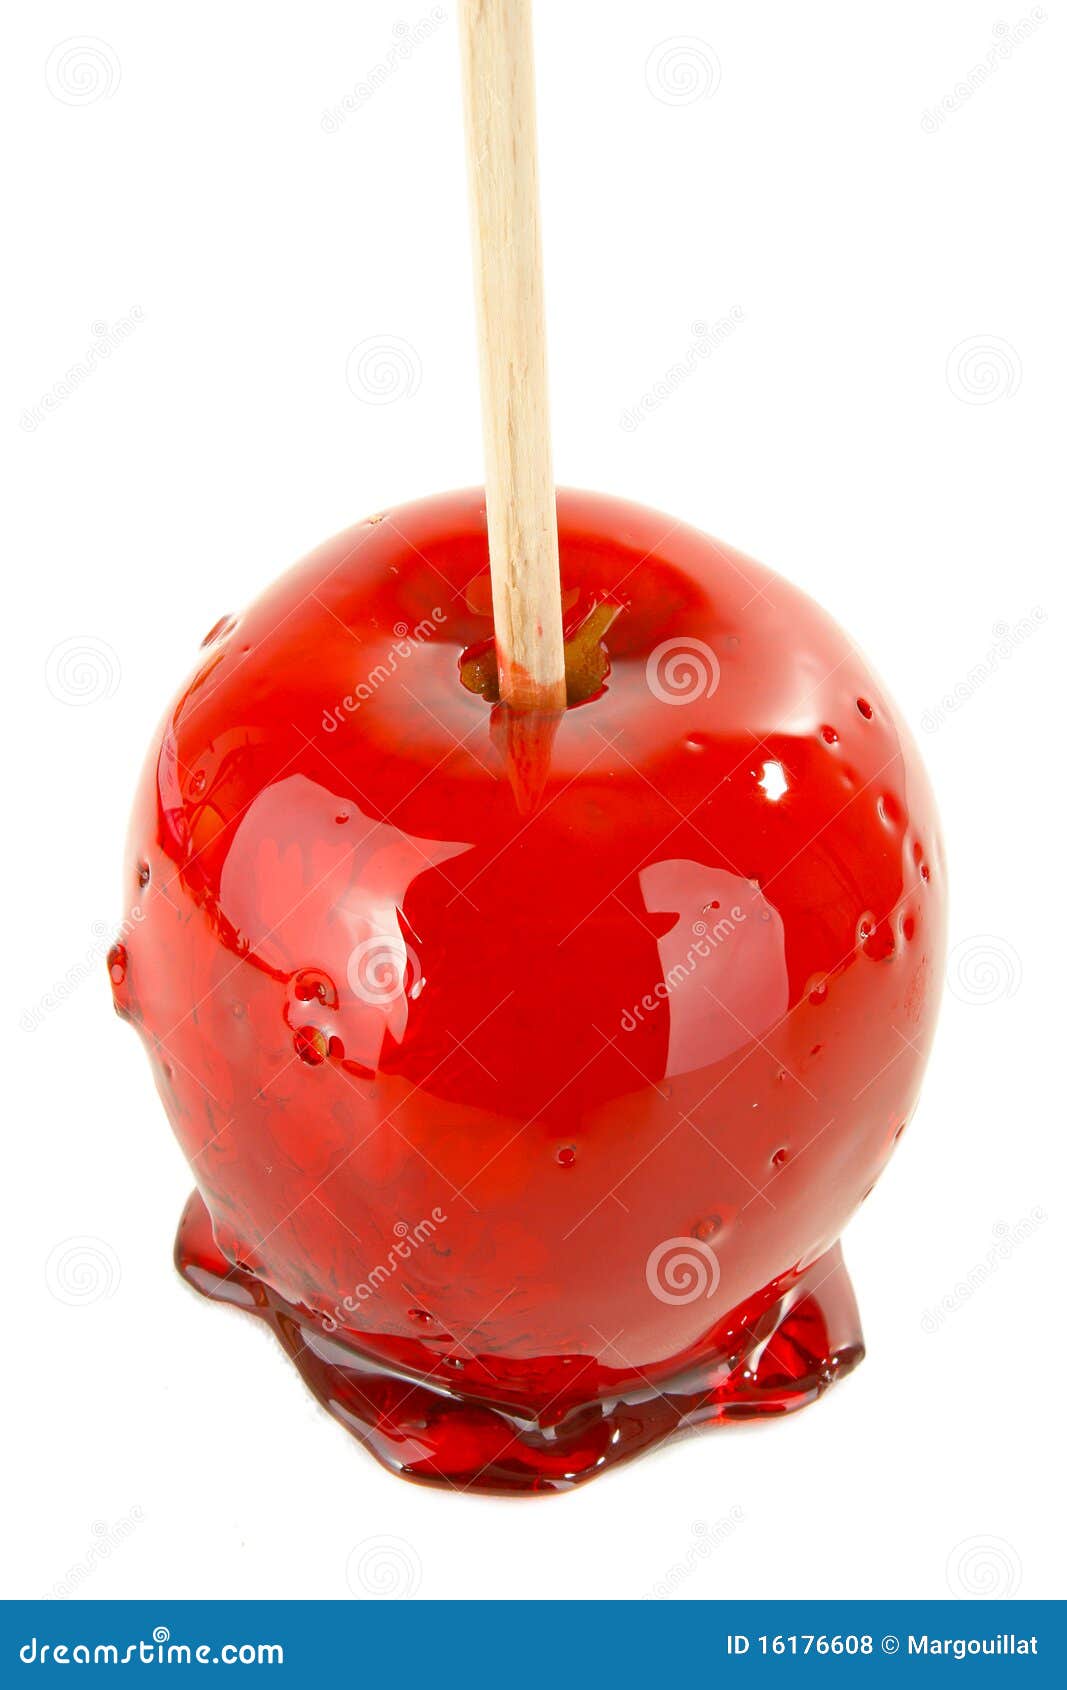 candy apple clipart - photo #47